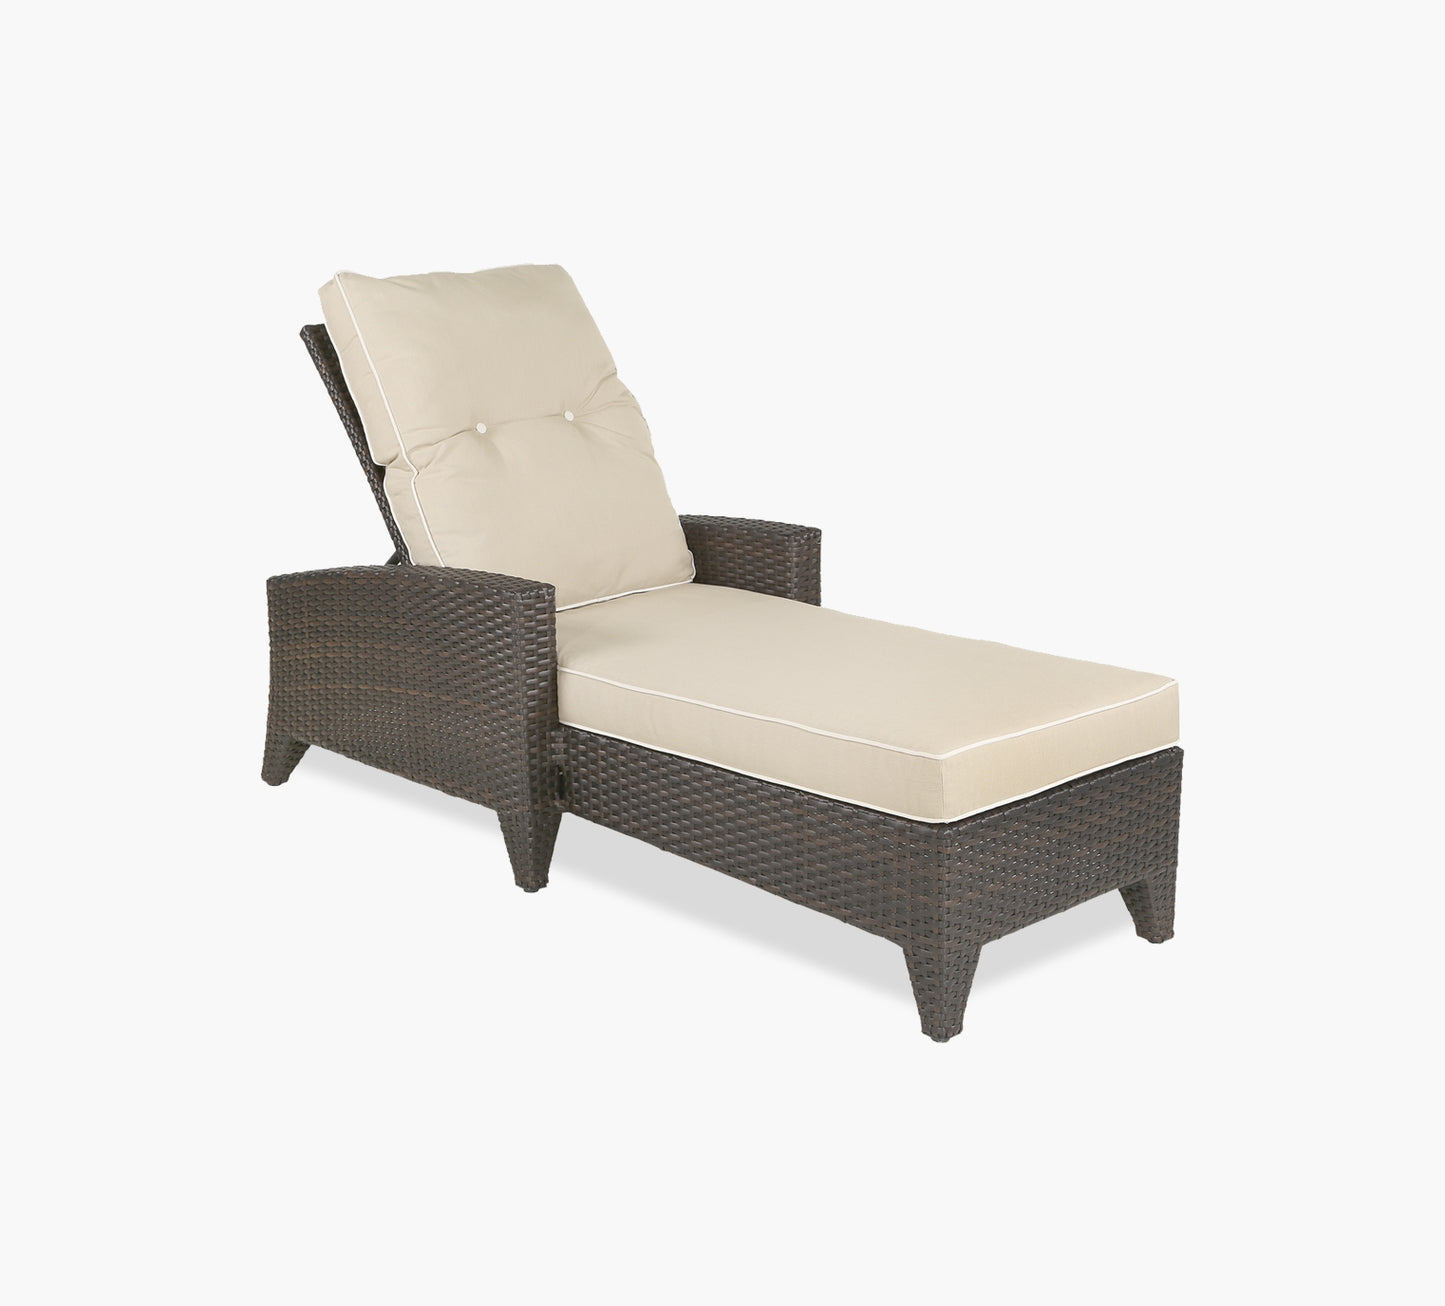 Lakewood Outdoor Chaise Lounge